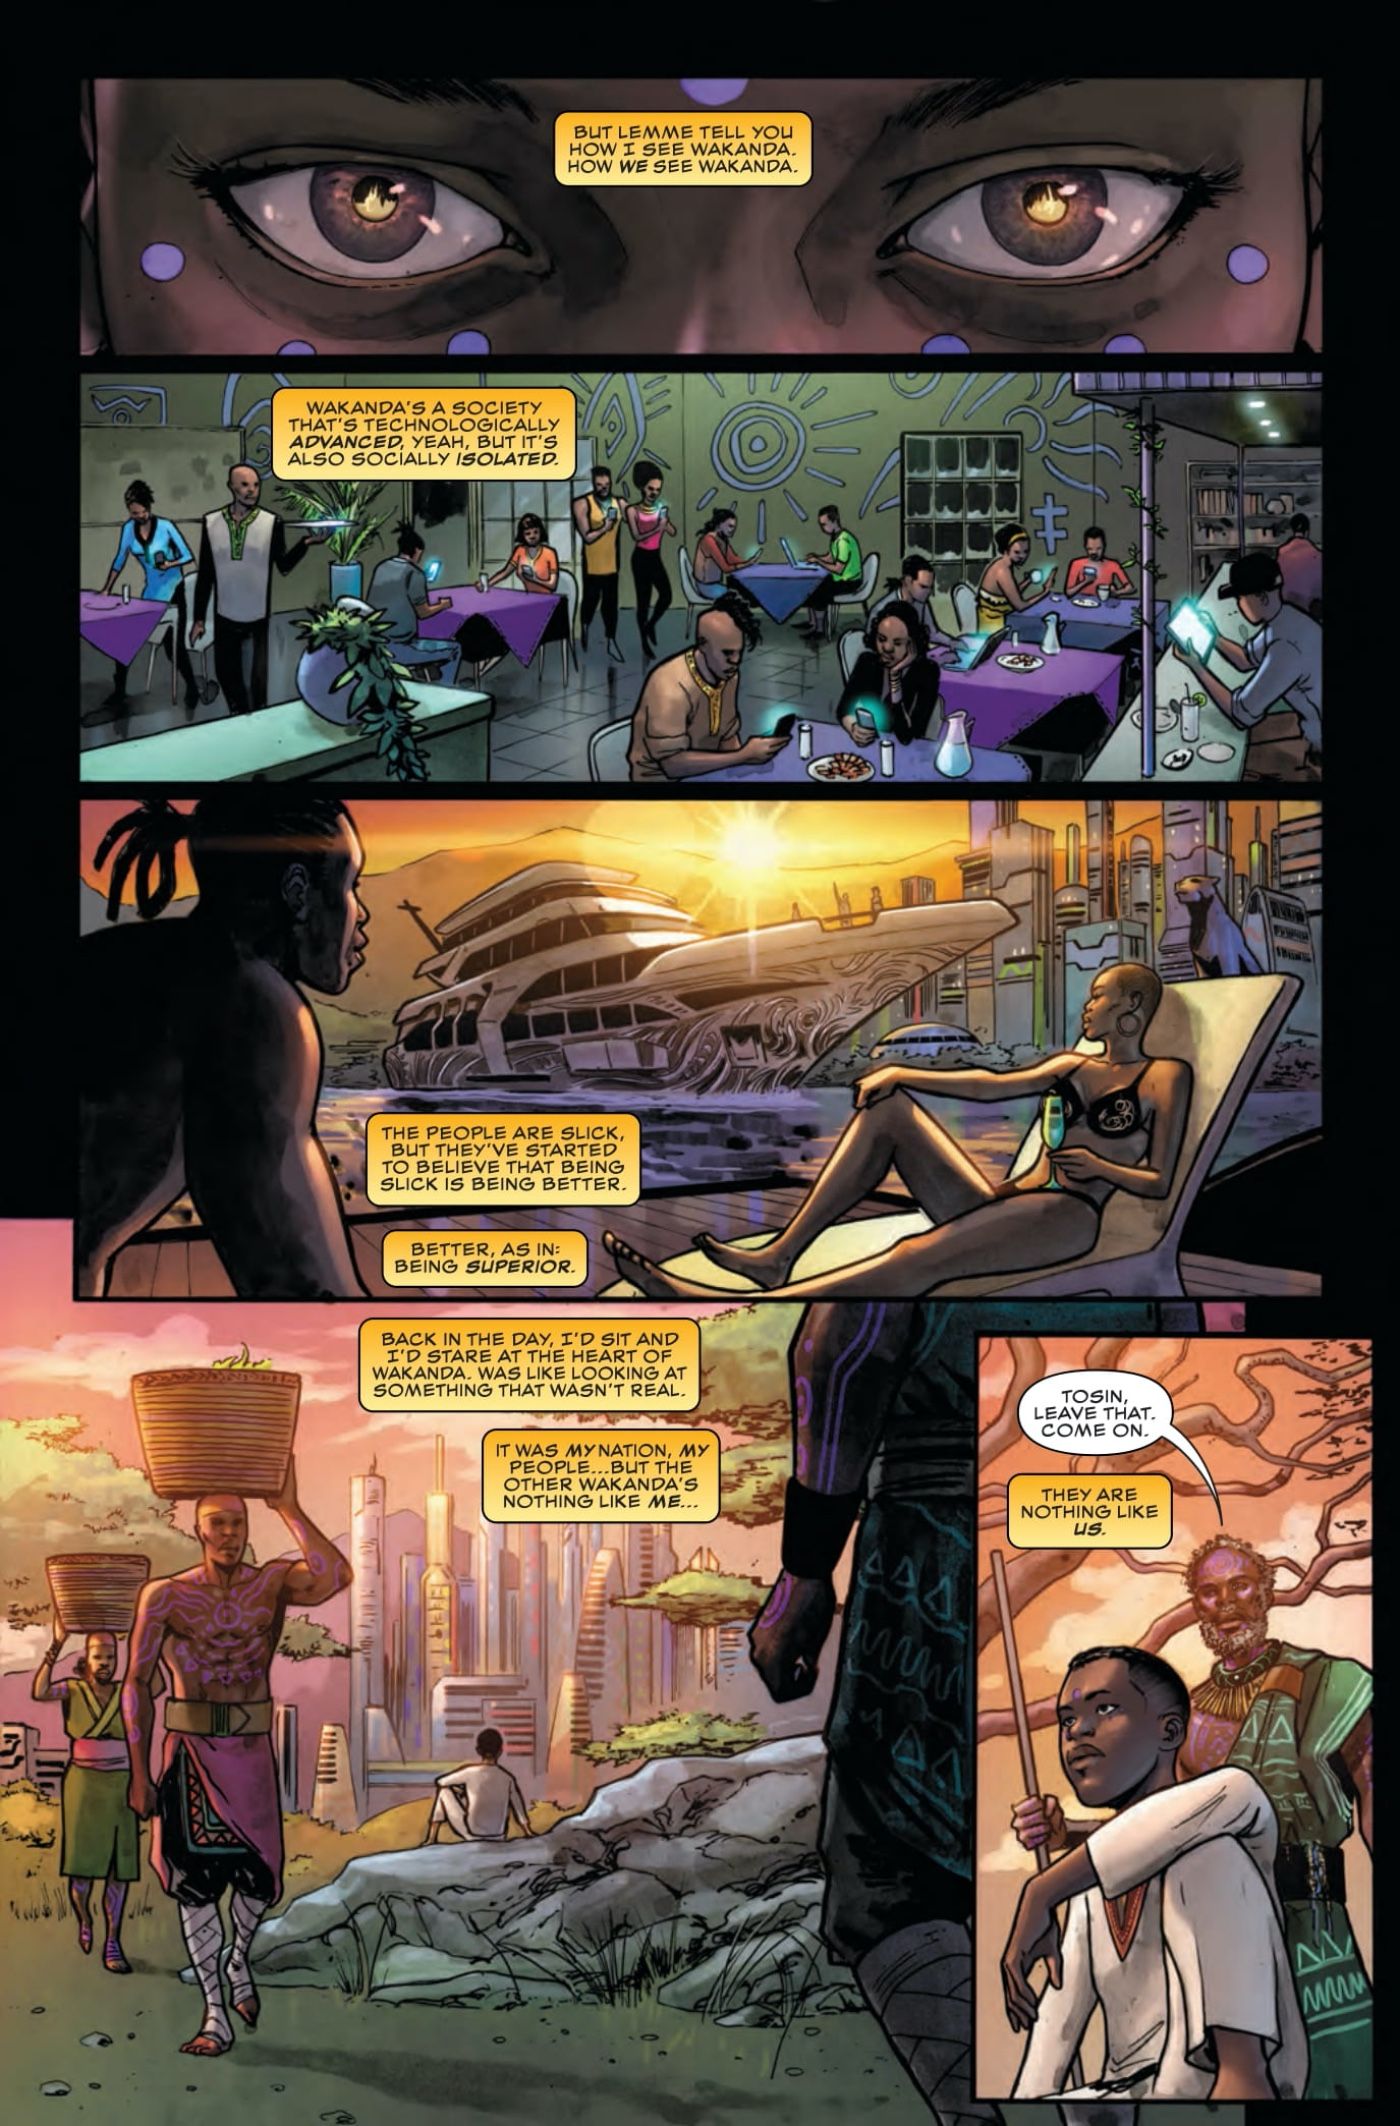 Black Panther 200 preview page